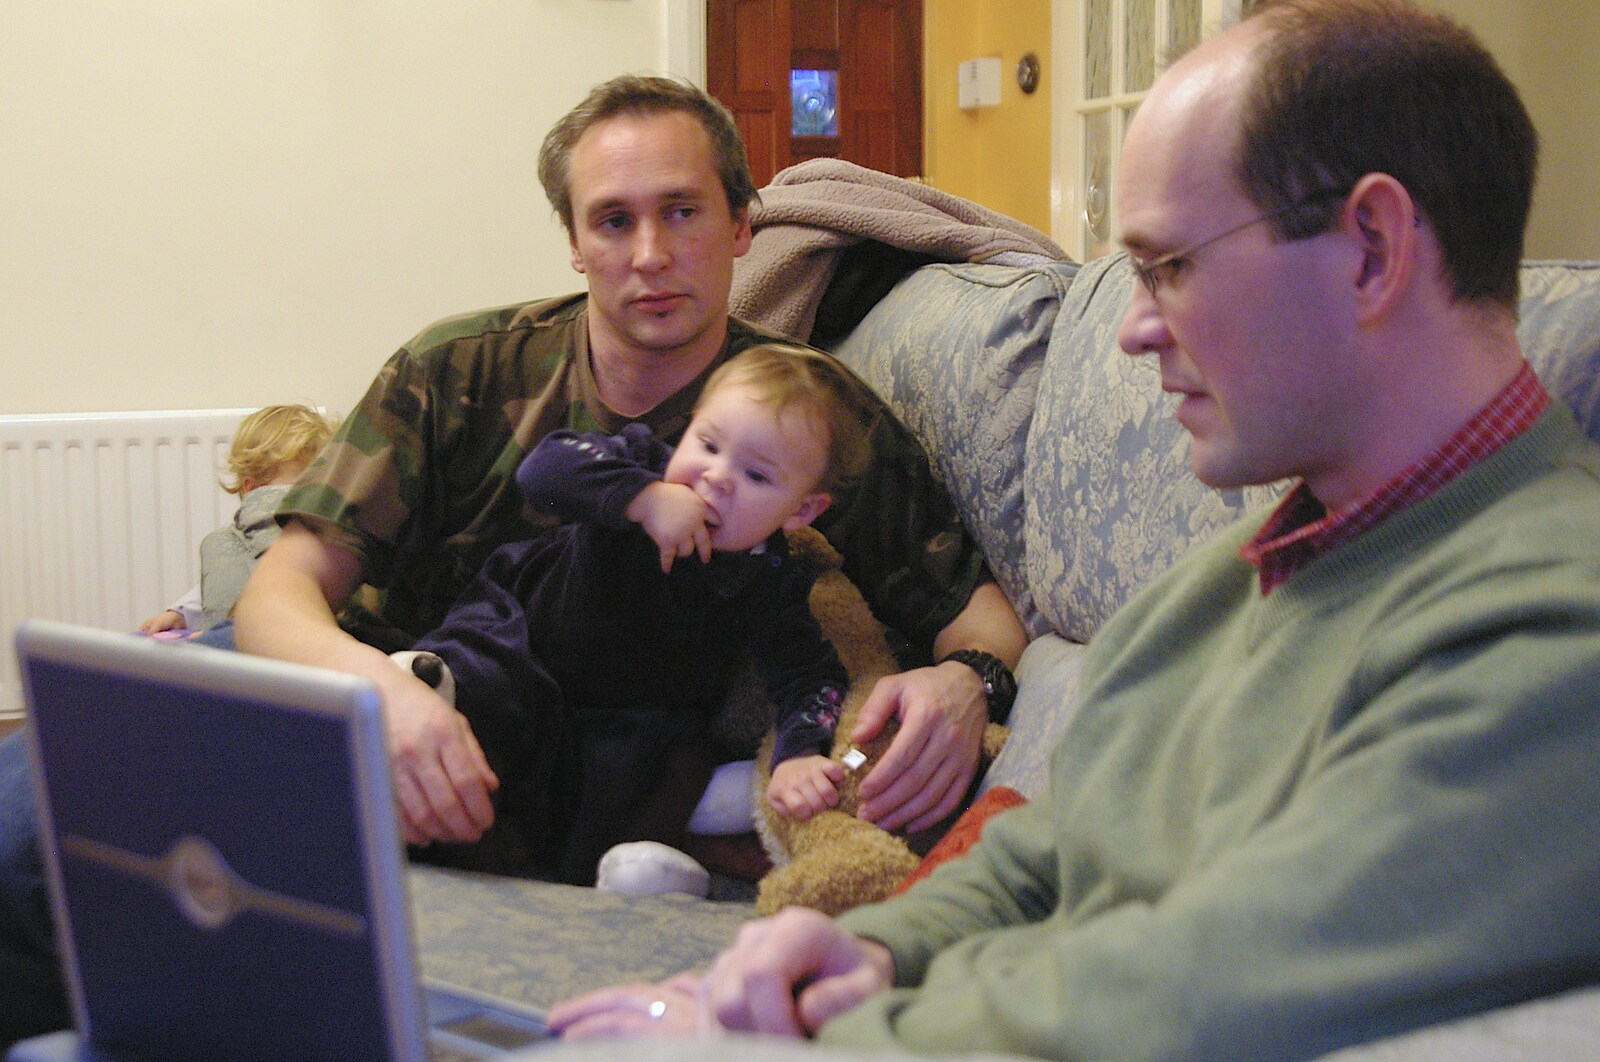 Chris, Lee-lou and Phil on a laptop from Boxing Day Miscellany, Hordle and Barton-on-Sea, Hampshire - 26th December 2005